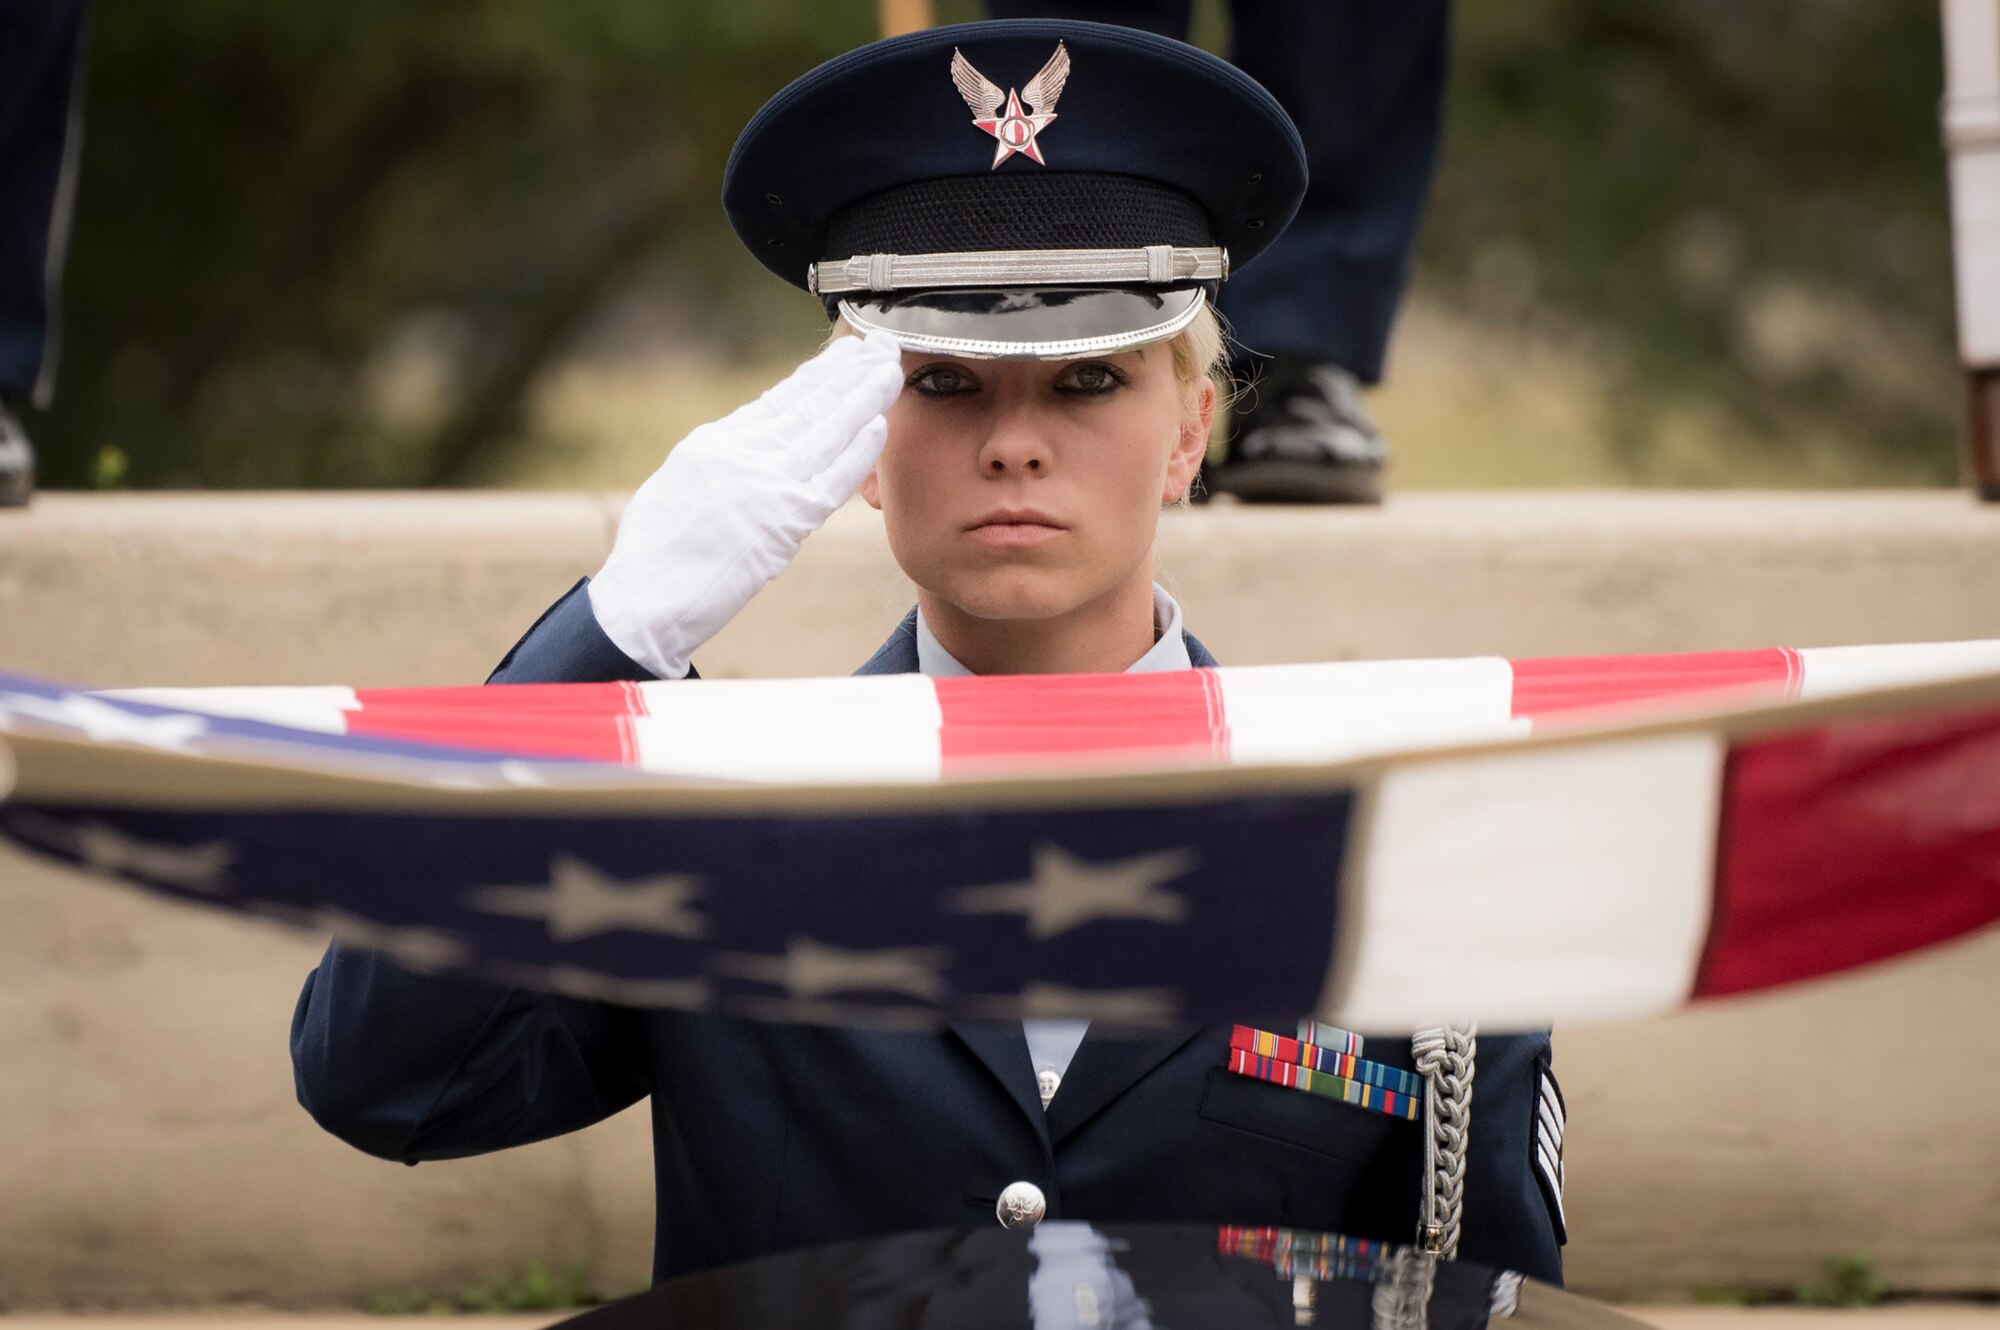 Staff Sgt. Elena Konter, 96th Medical Operations Squadron, salutes during the flag-folding portion of the unit’s graduation ceremony at Eglin Air Force Base, Fla., March 1.  Approximately 12 new Airmen graduated from the 120-plus-hour course. The graduation performance includes flag detail, rifle volley, pall bearers and bugler for friends, family and unit commanders. (U.S. Air Force photo/Samuel King Jr.)